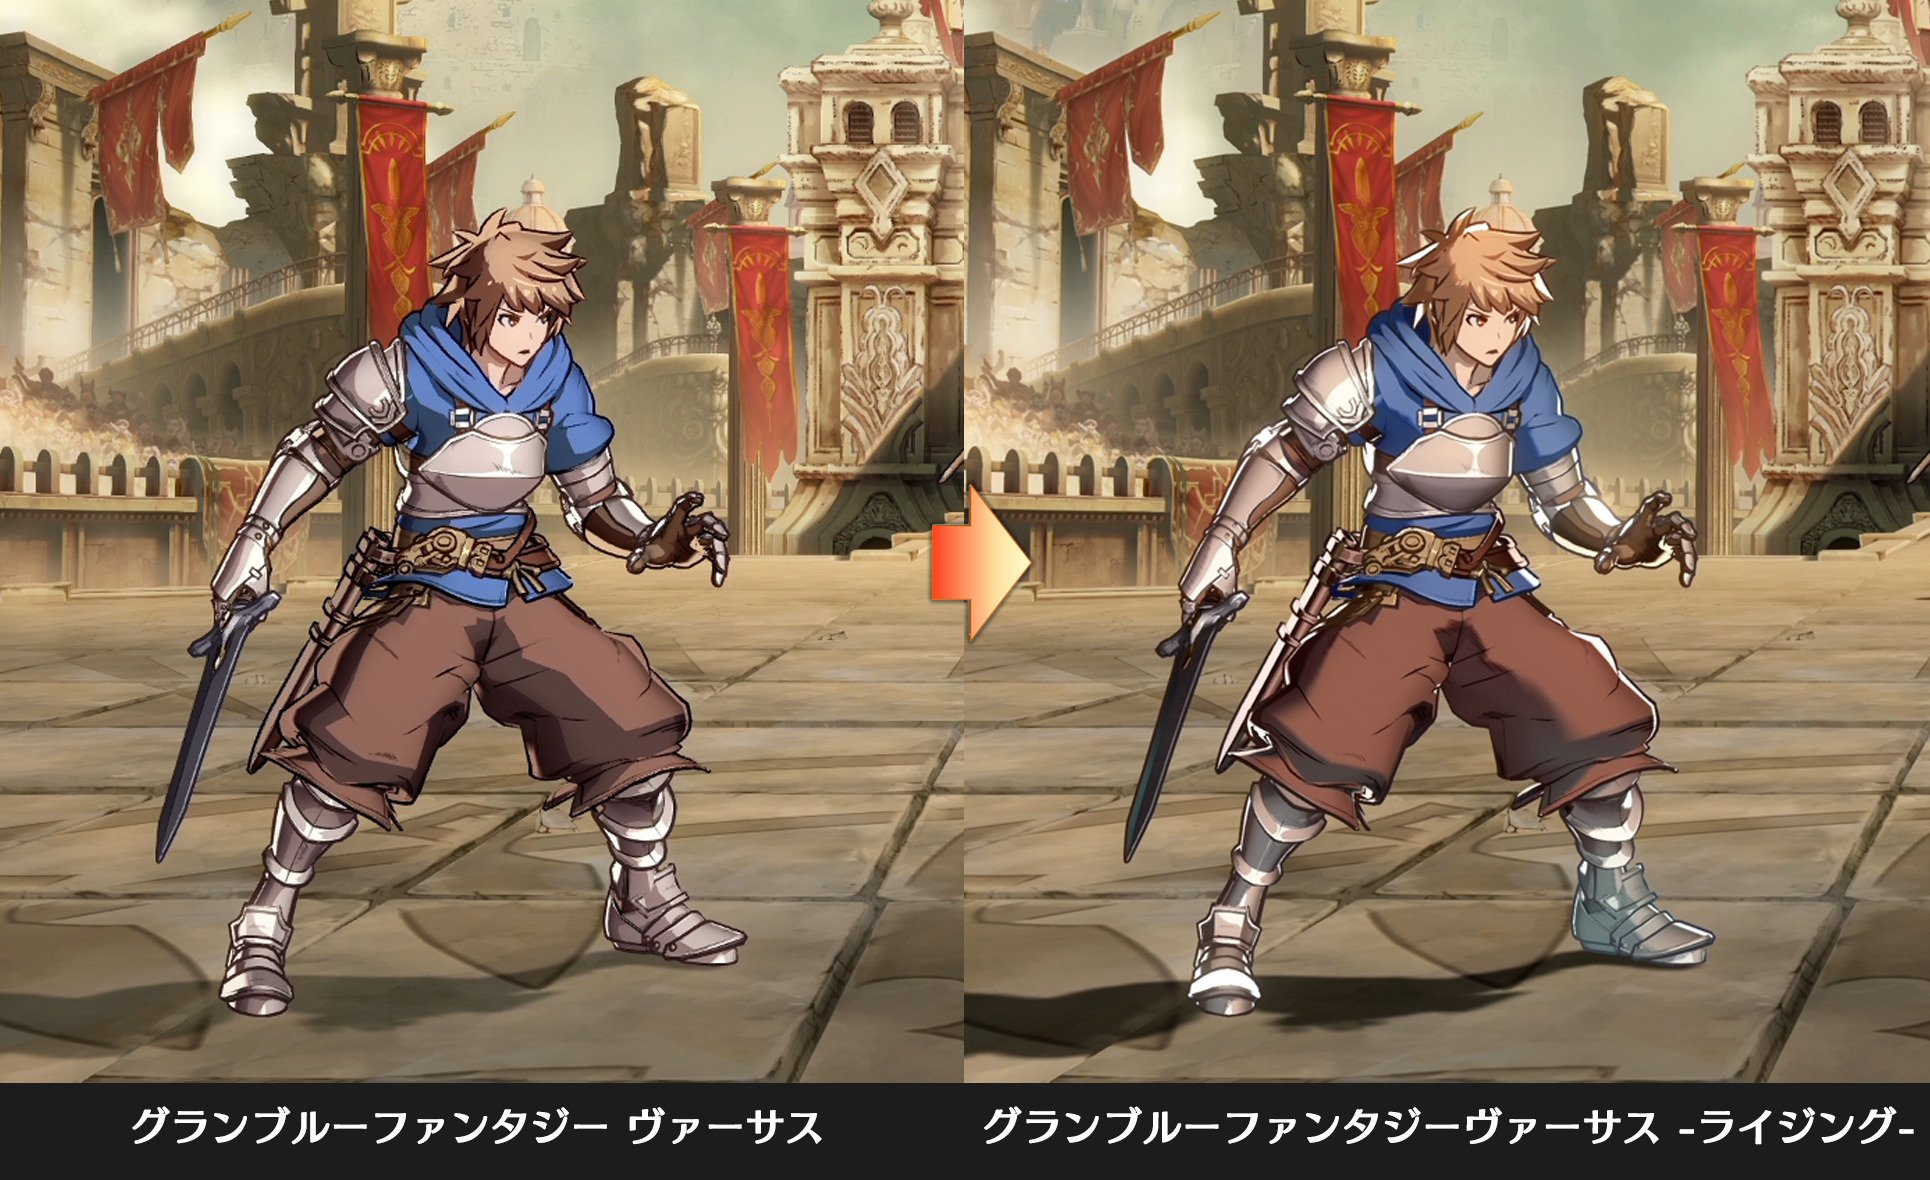 Granblue Fantasy: Versus Rising Coming to PS5, PS4, and PC With Rollback  Netcode, Cross-Play